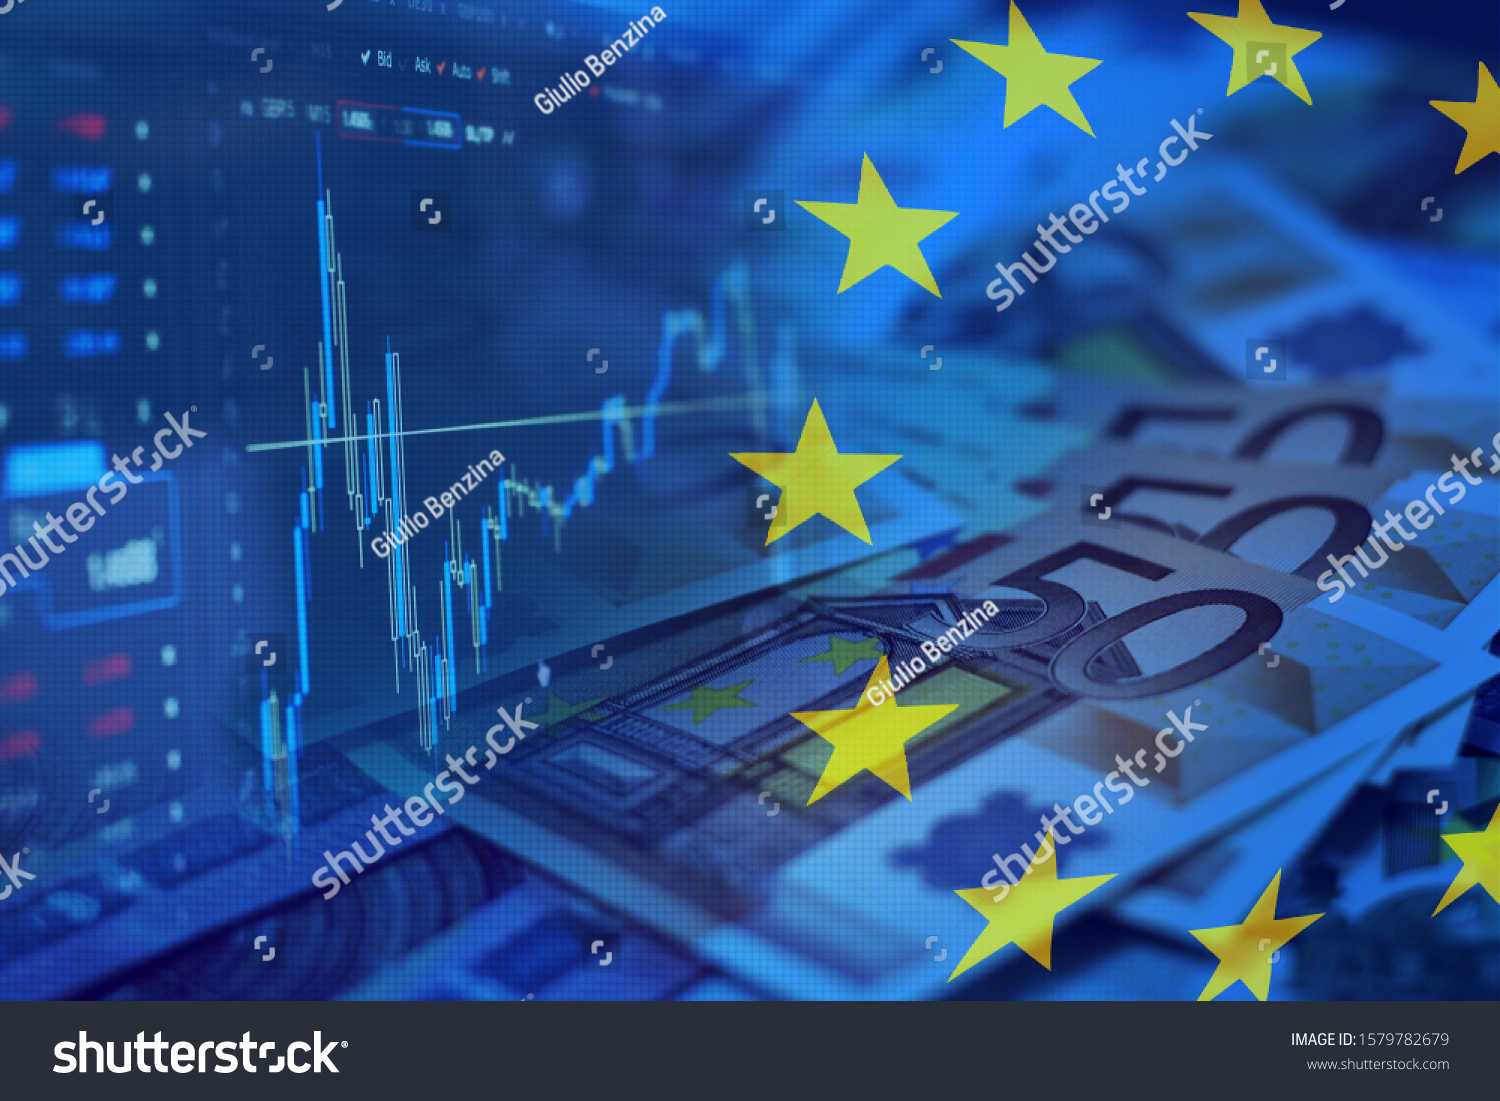 European currency Euro. Stock market. Currency market. European flag. Stock market chart. EEC. 50 euros. Value of money. #1579782679